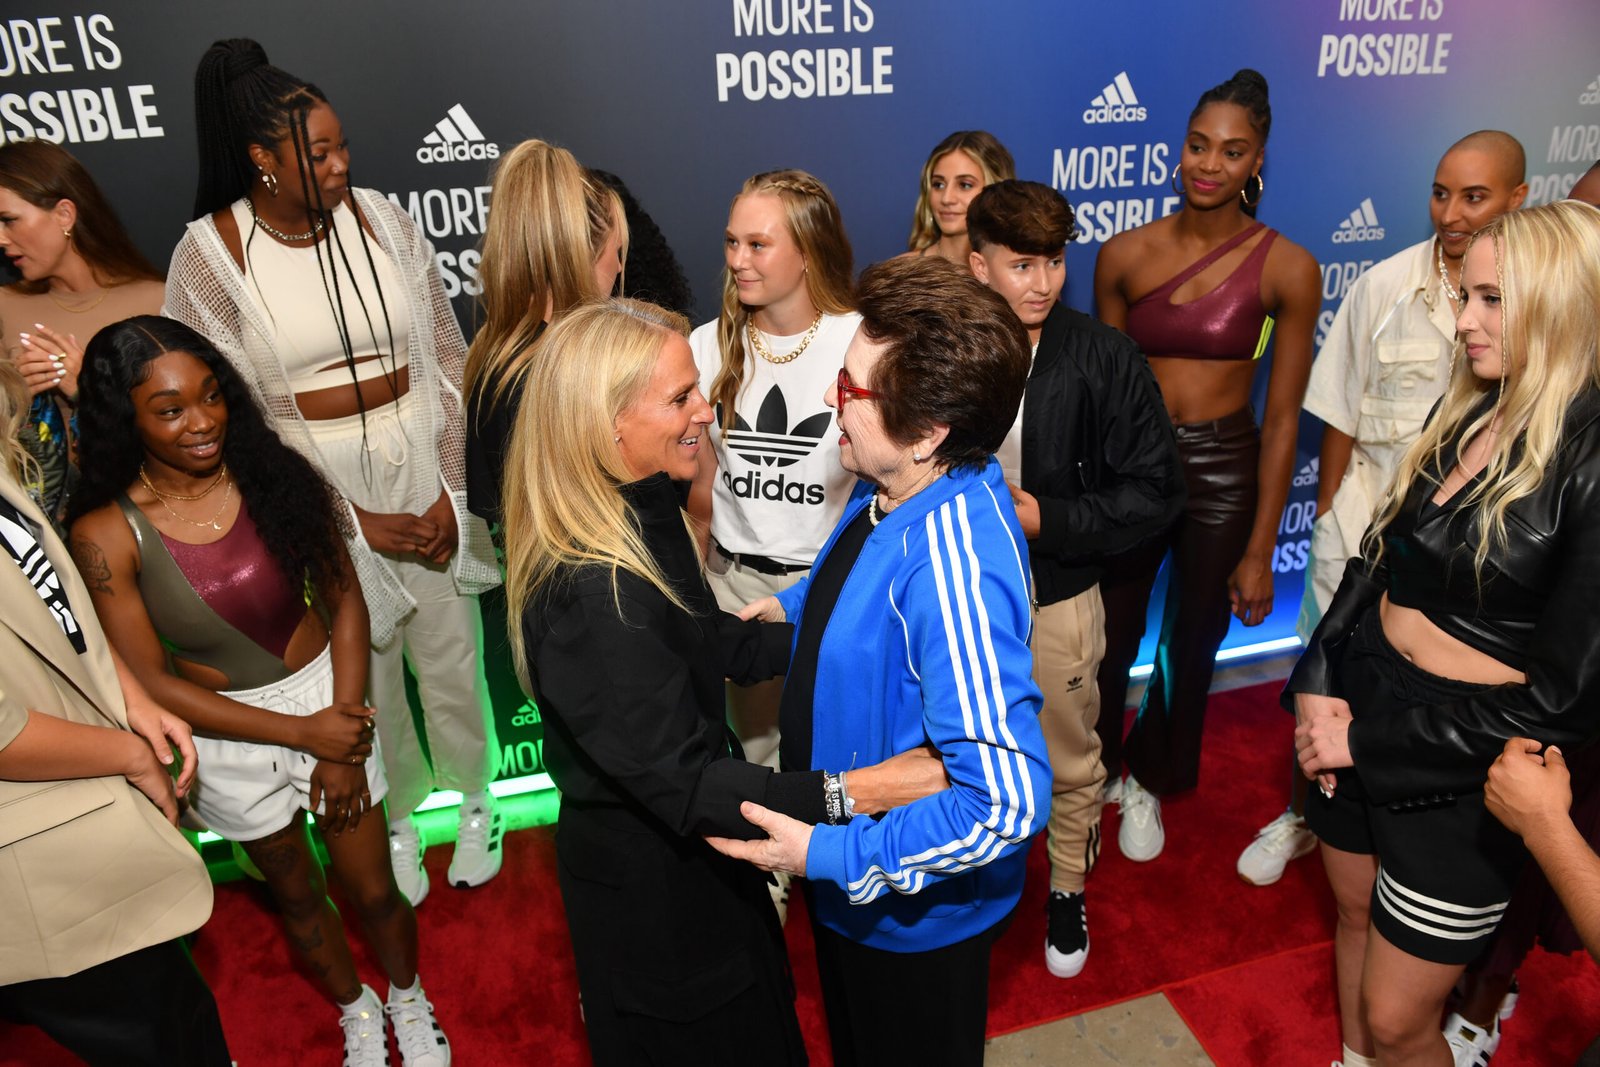 TO CELEBRATE TITLE IX’S 50th ANNIVERSARY ADIDAS SIGNS 15 FEMALE STUDENT-ATHLETES TO NIL DEALS AND ANNOUNCES BRAND INITIATIVES TO PUSH SPORT FORWARD FOR ALL 